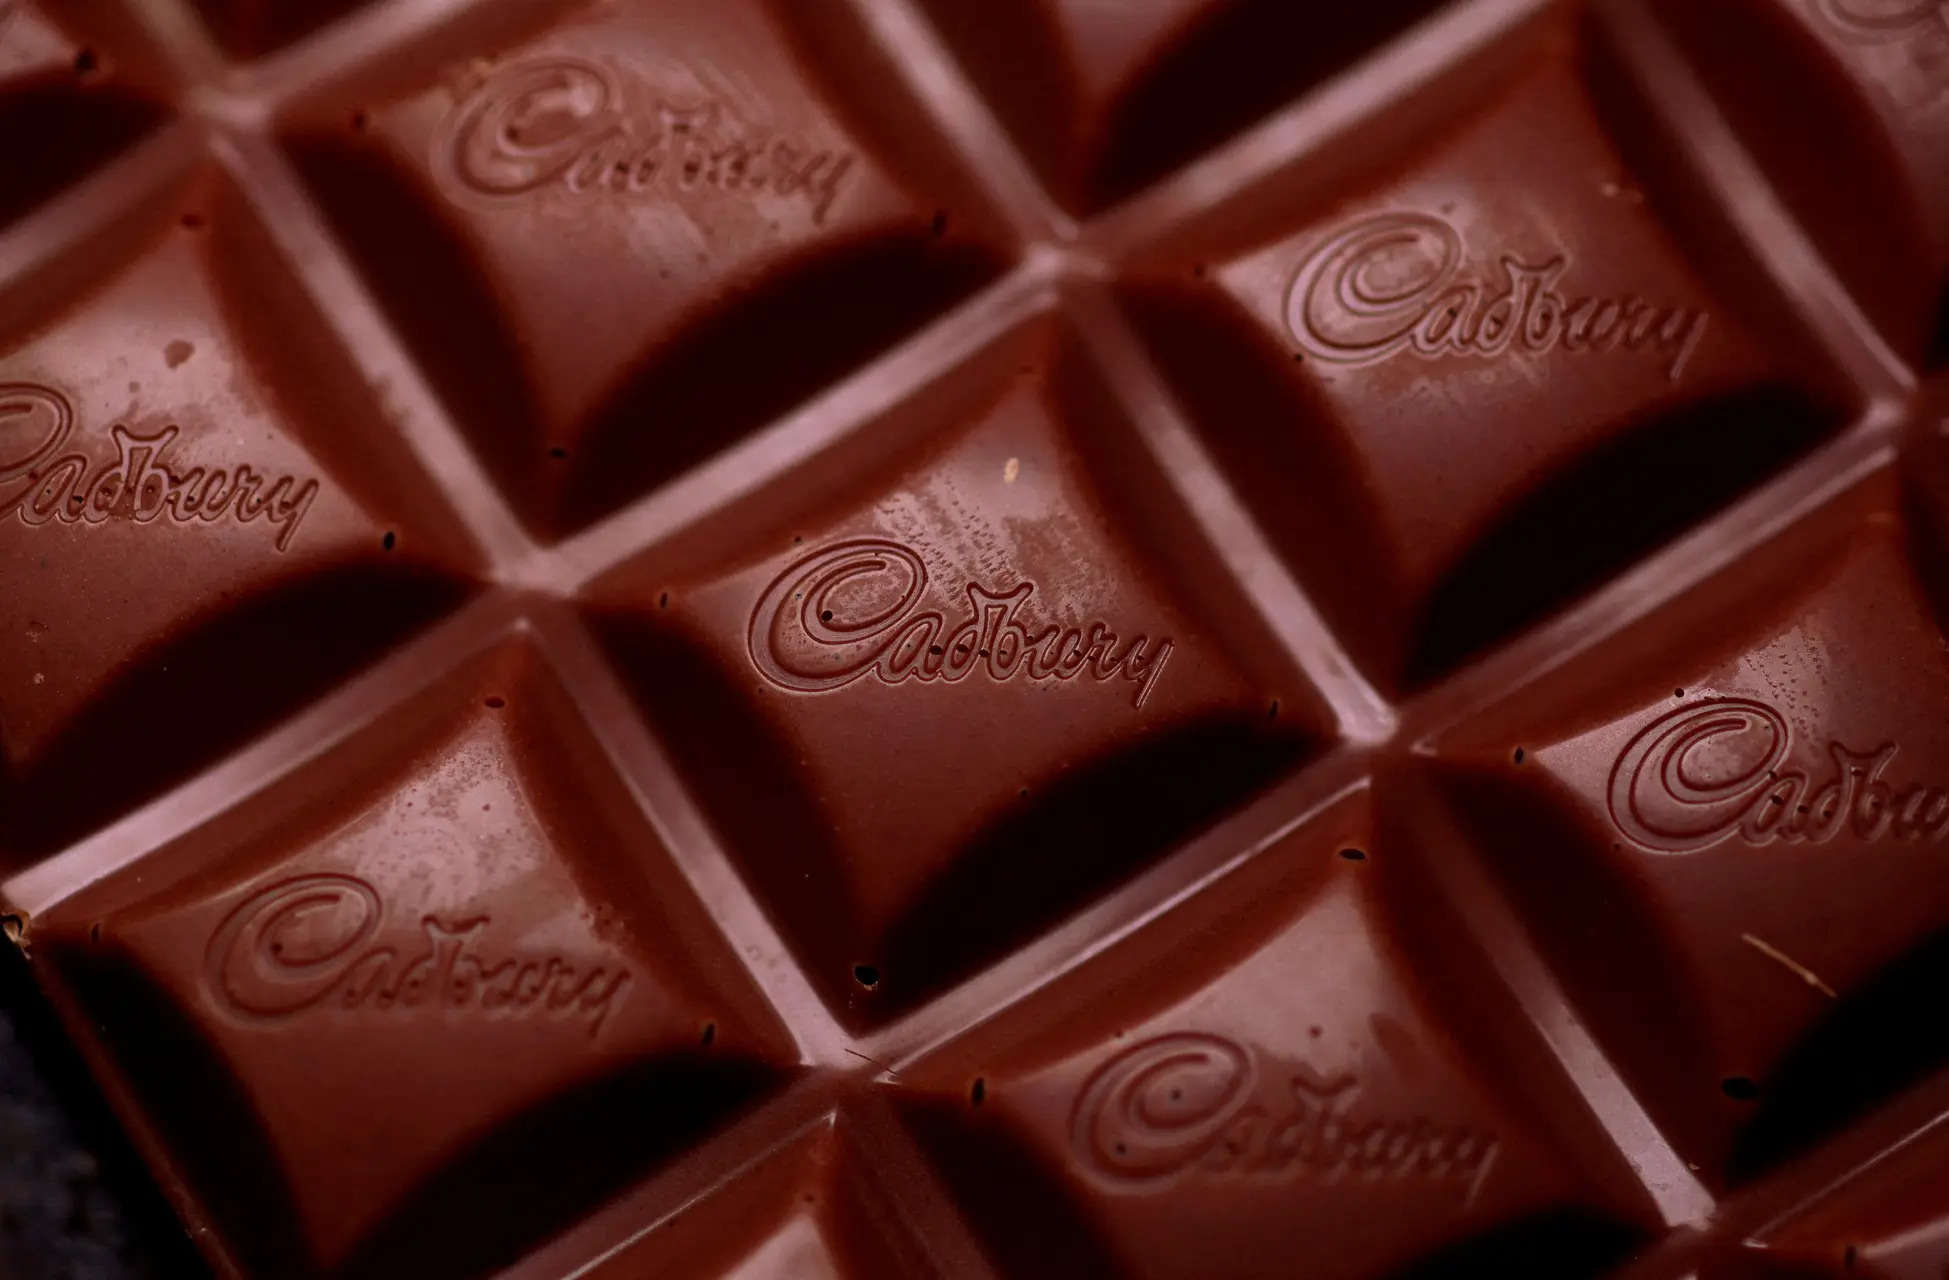 Heavy metal in most chocolates may not pose health risk, researchers say 